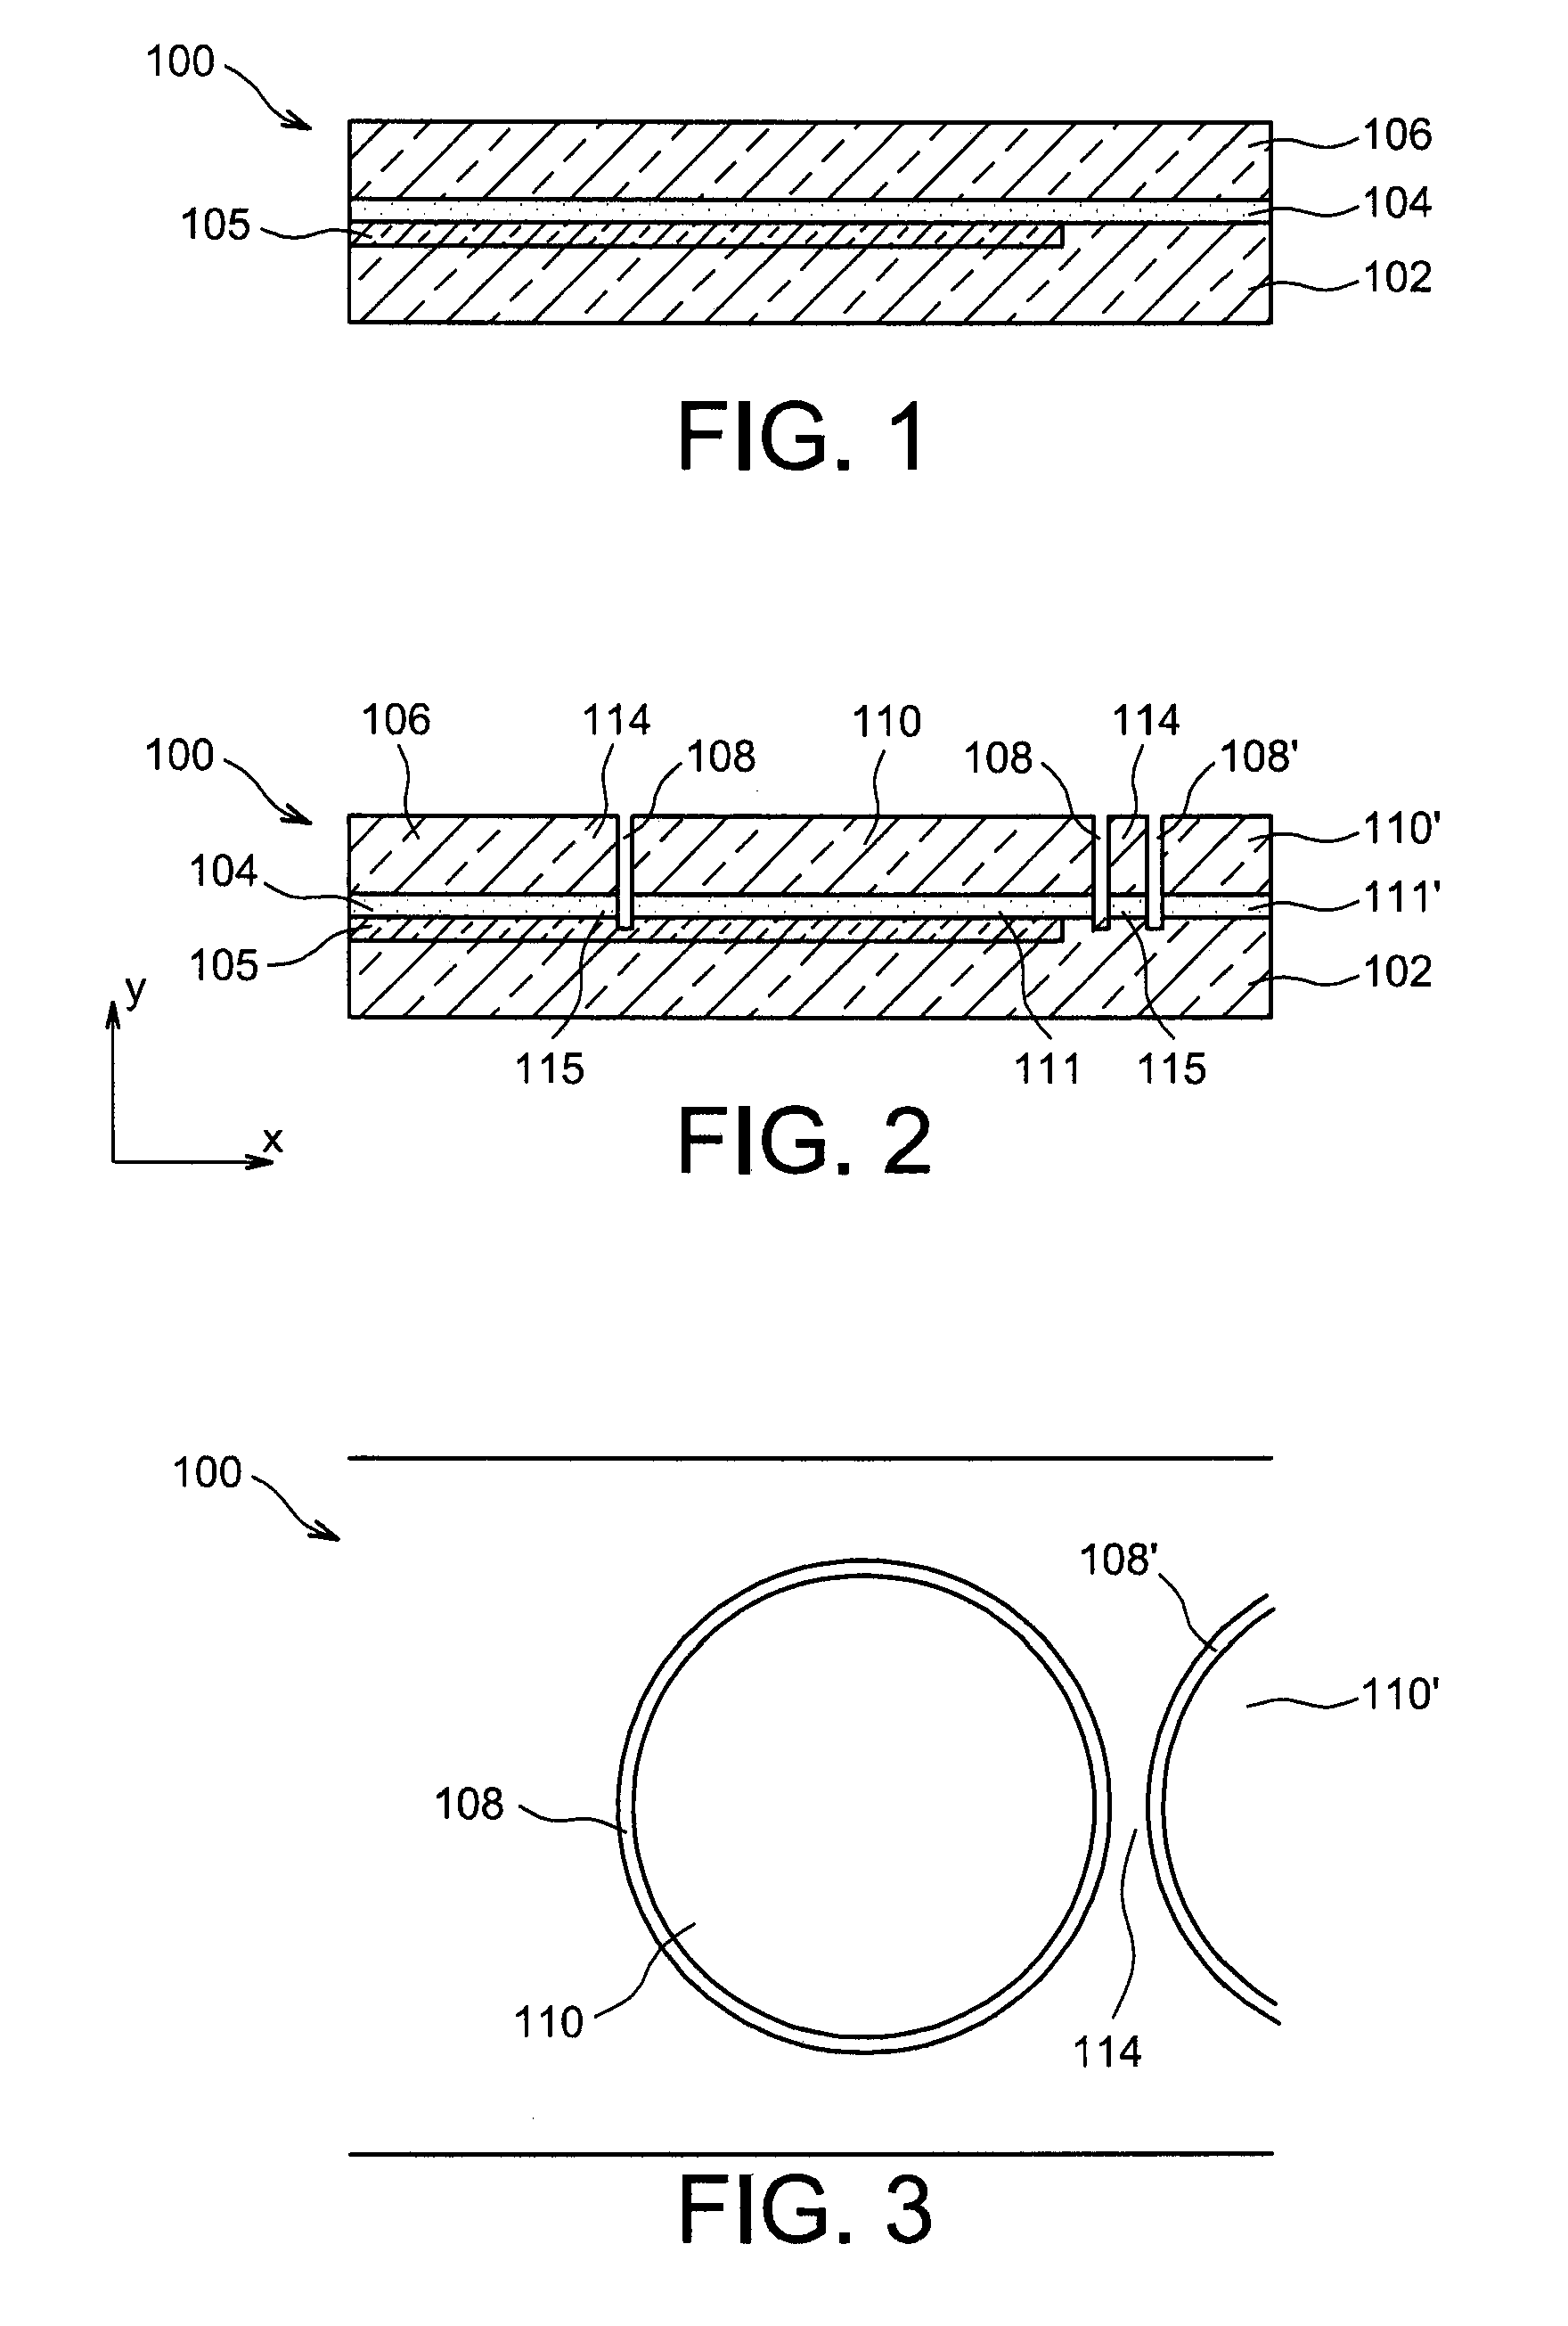 Method of producing a suspended membrane device